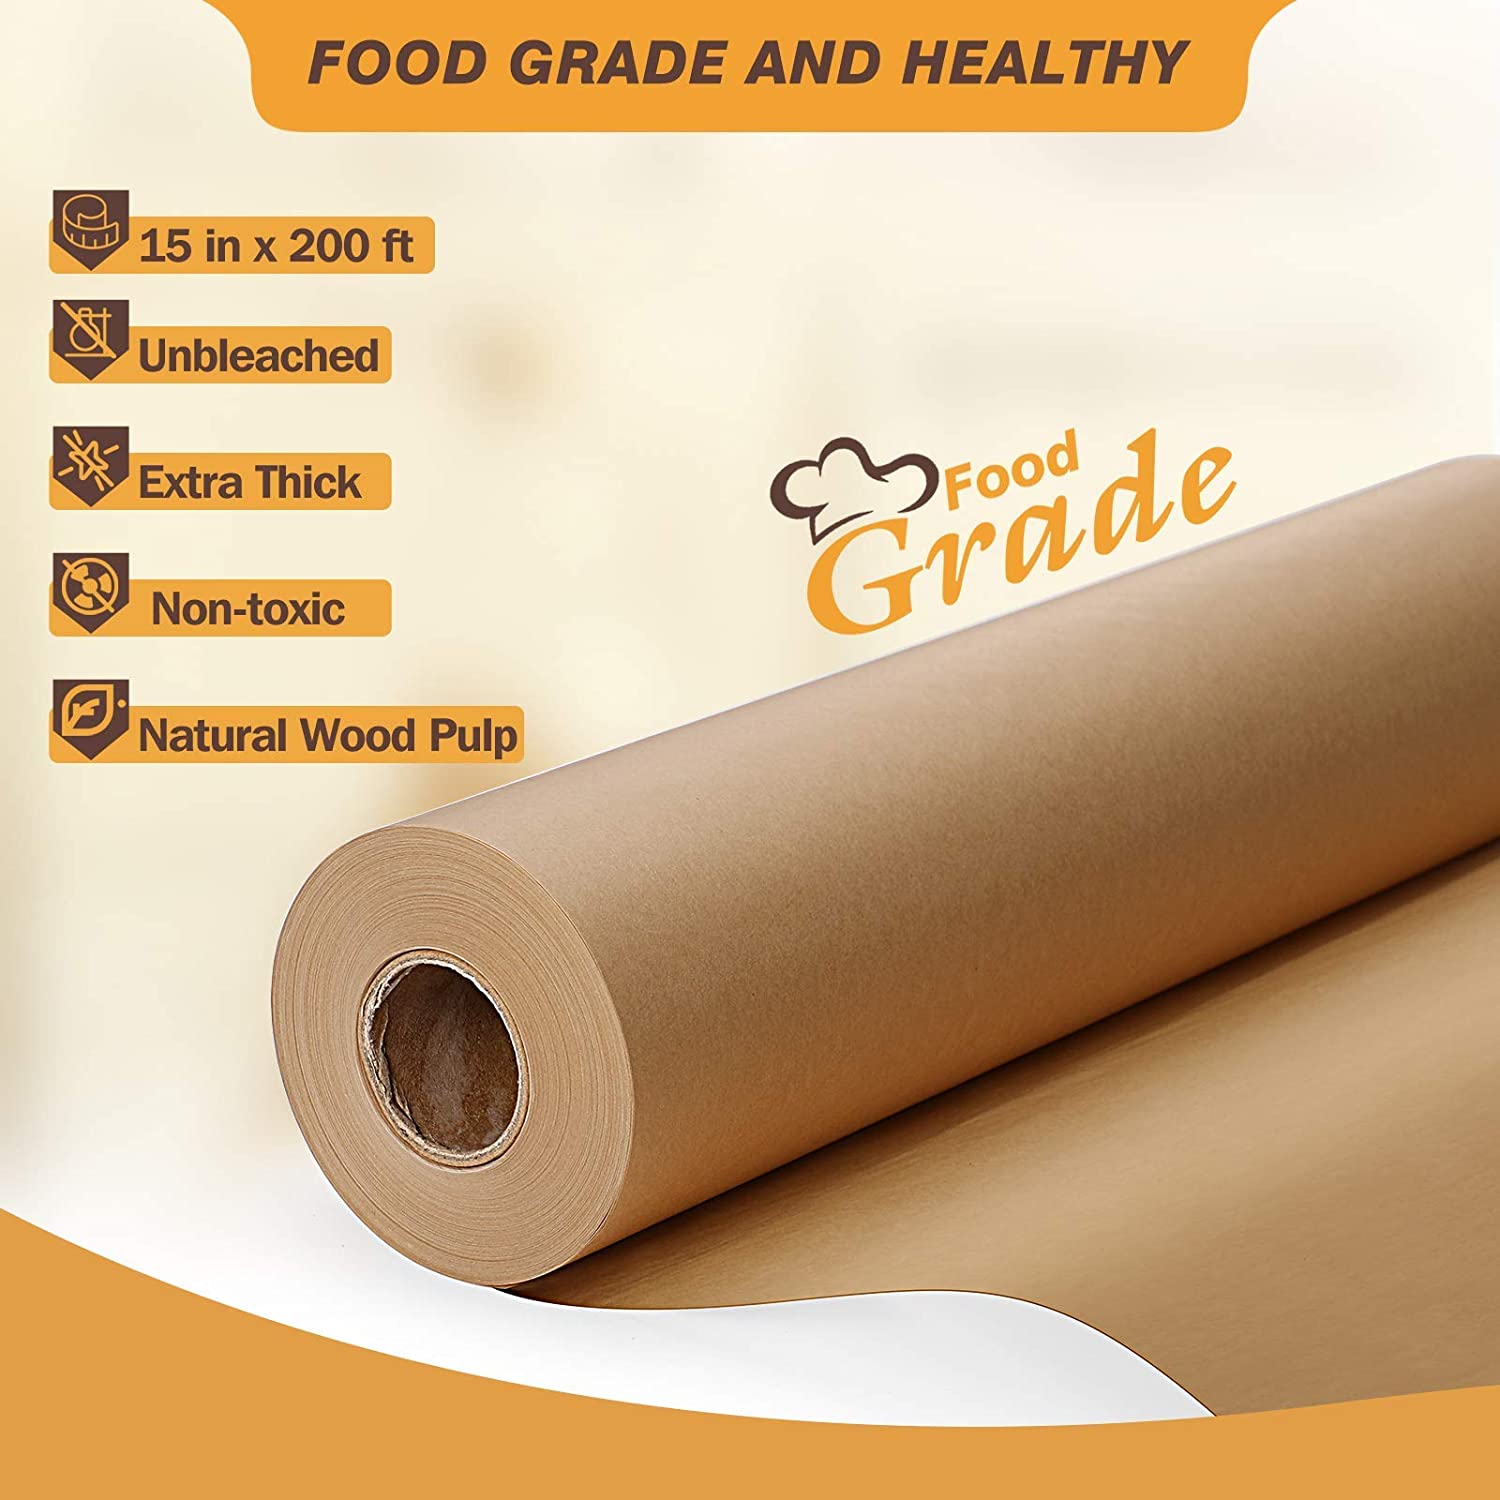 Parchment Paper Roll for Baking 12 Inch x 164 Ft Roll,for Cooking